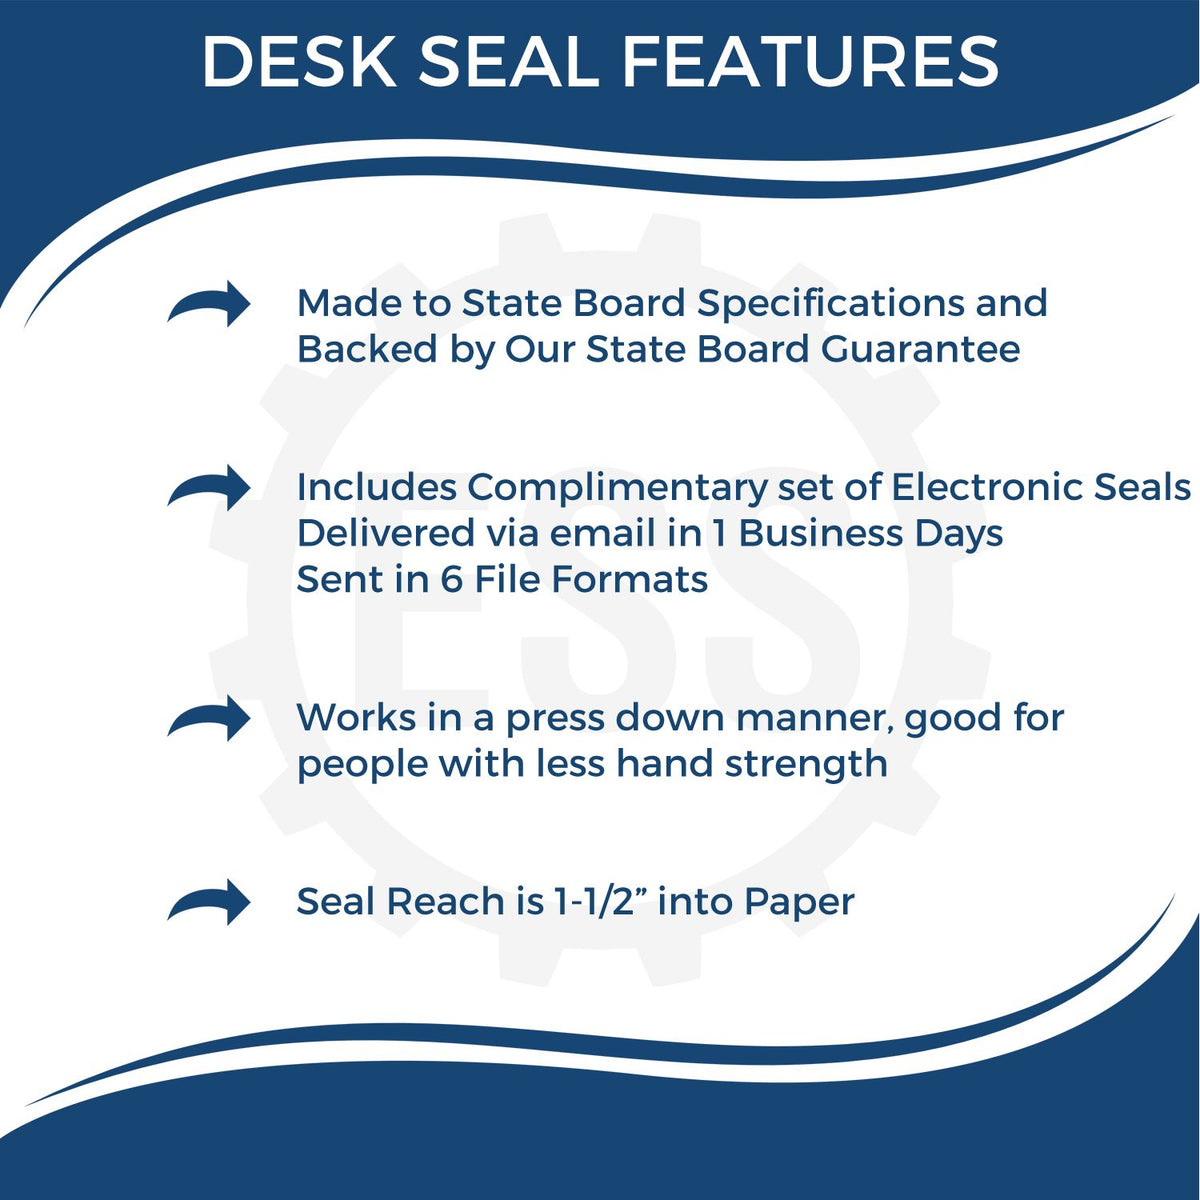 A picture of an infographic highlighting the selling points for the Massachusetts Desk Surveyor Seal Embosser